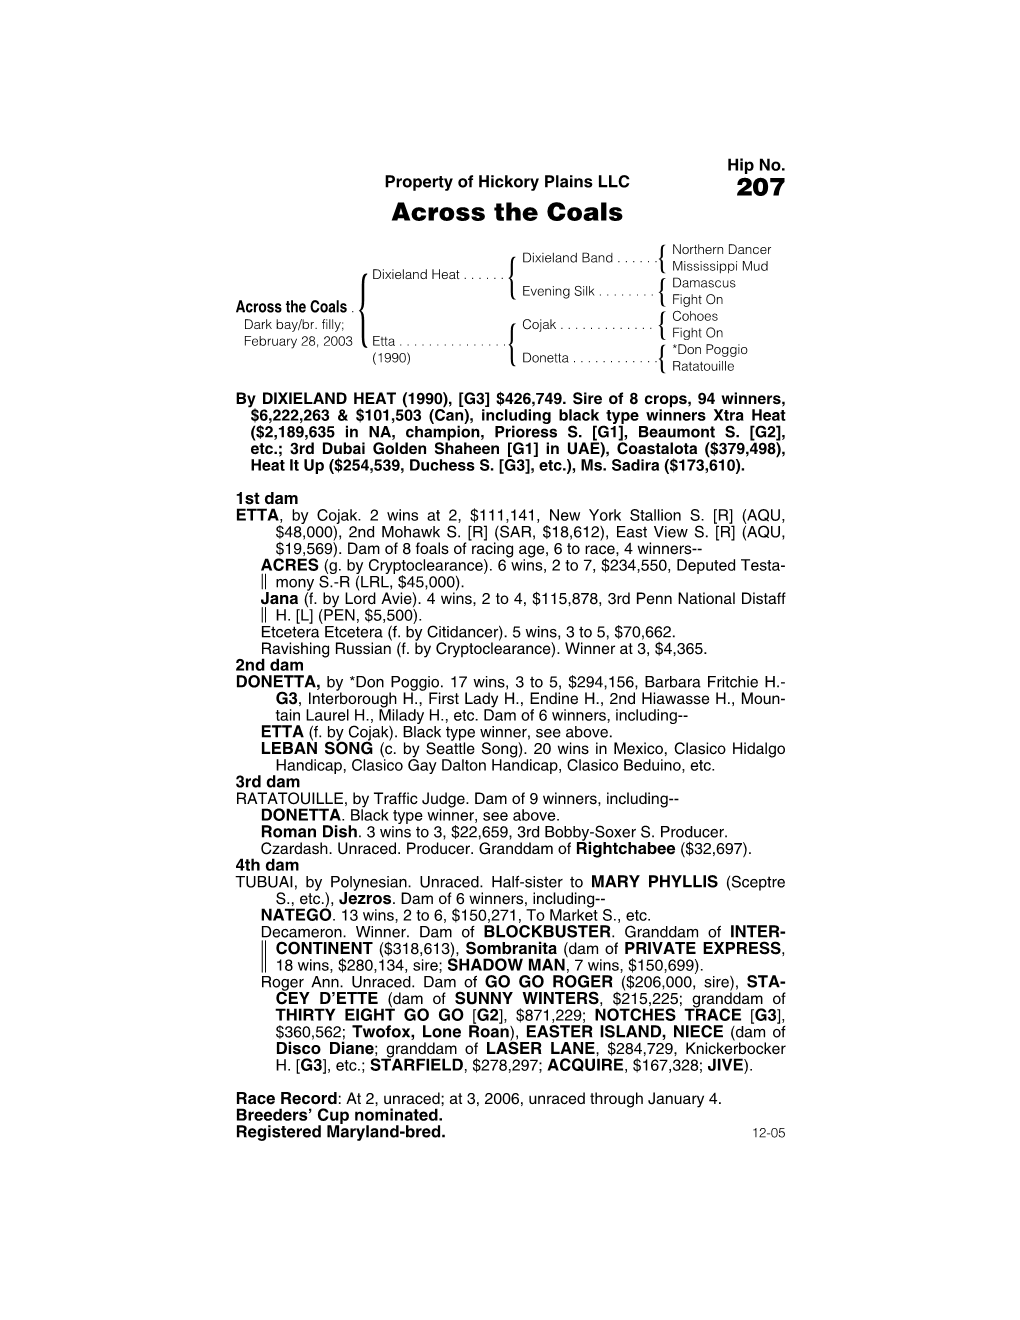 Page 1 by DIXIELAND HEAT (1990), [G3] $426,749. Sire of 8 Crops